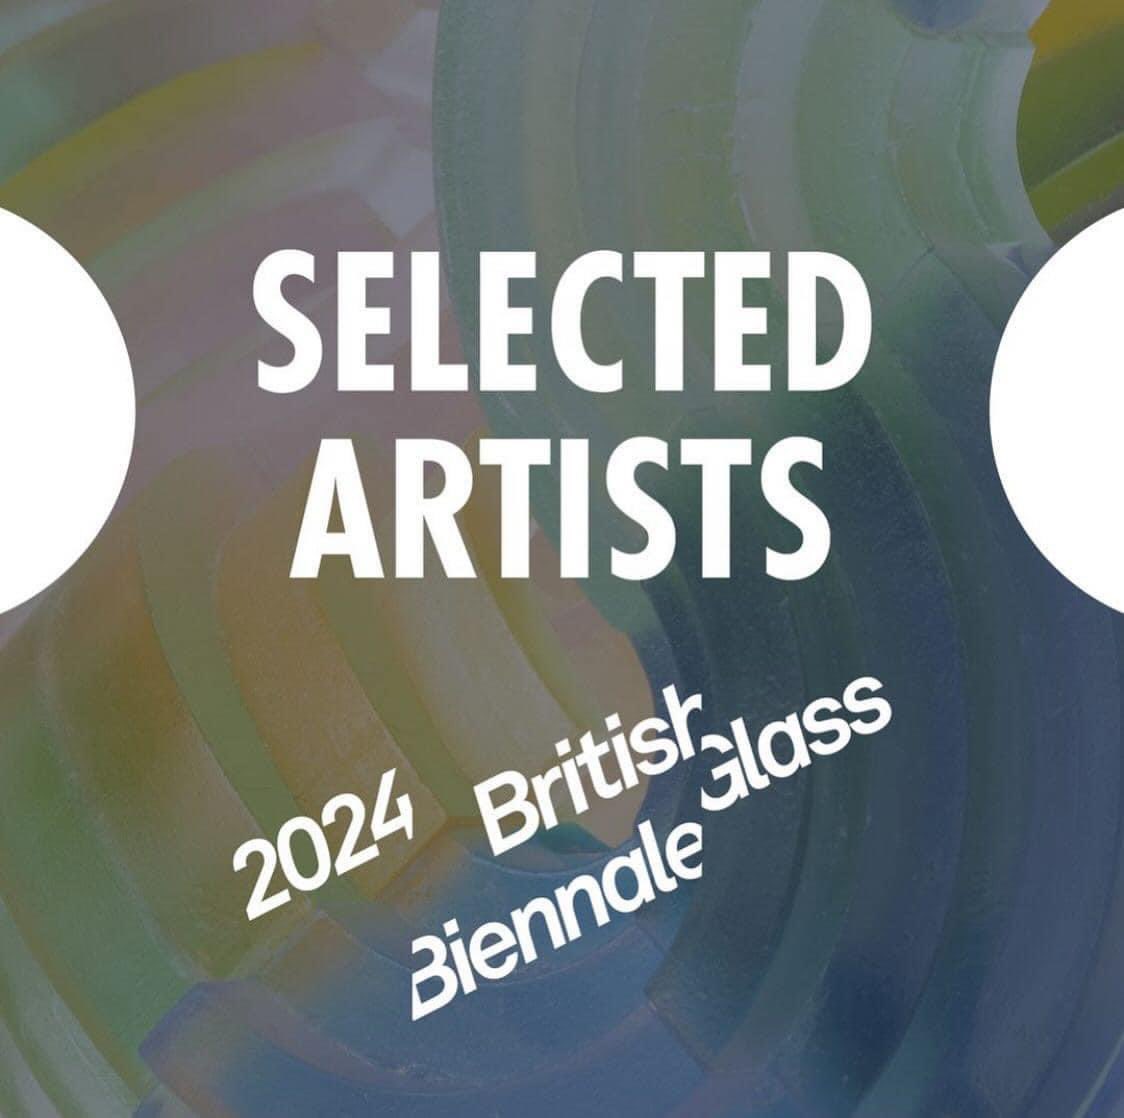 It is a joy and and an honour to be selected for the British Glass Biennale in Stourbridge this year. I am enormously grateful to everyone involved #InternationalFestivalofGlass @ifog2024